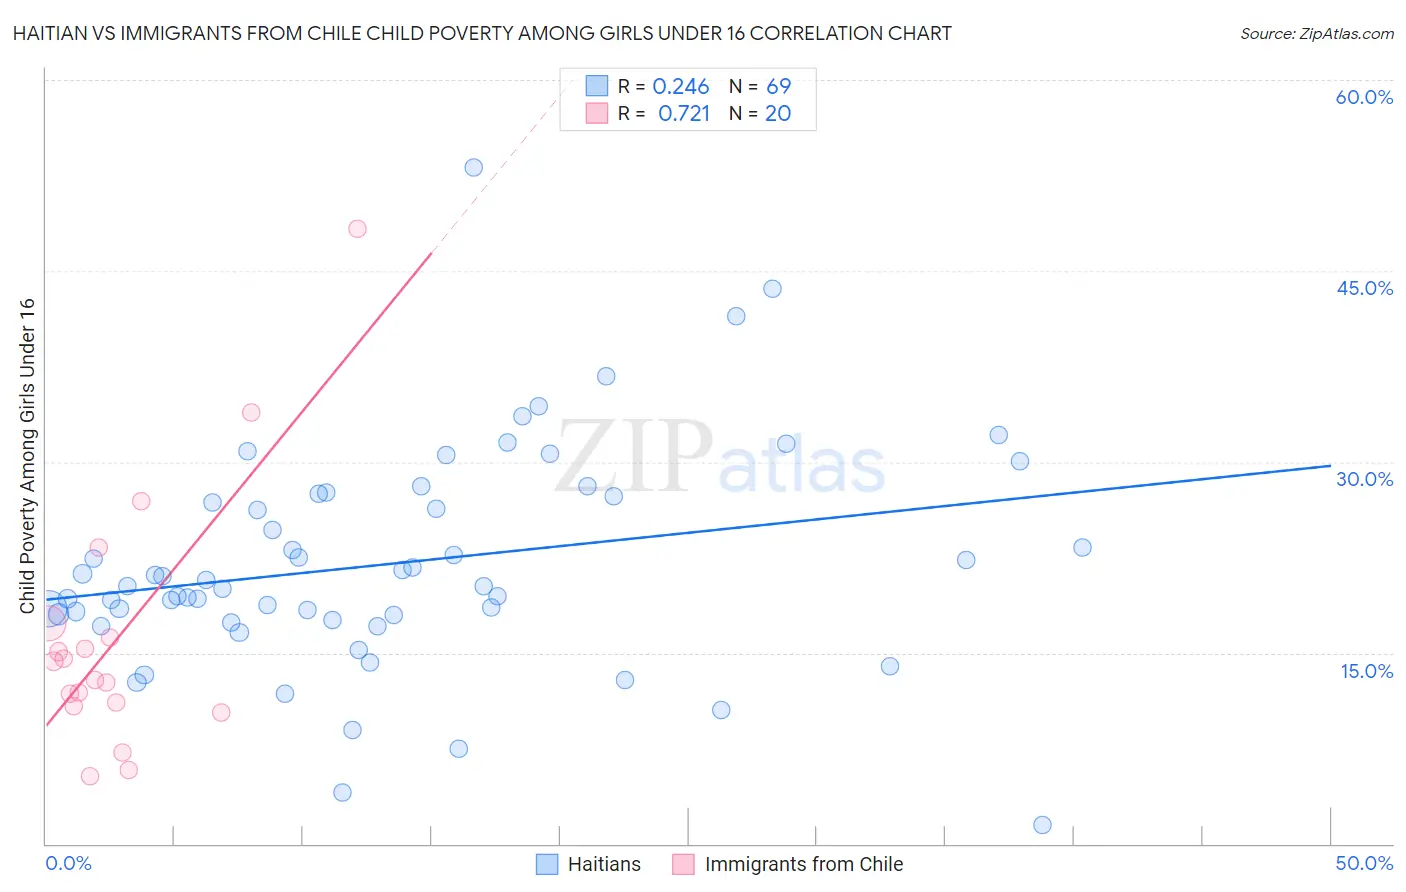 Haitian vs Immigrants from Chile Child Poverty Among Girls Under 16